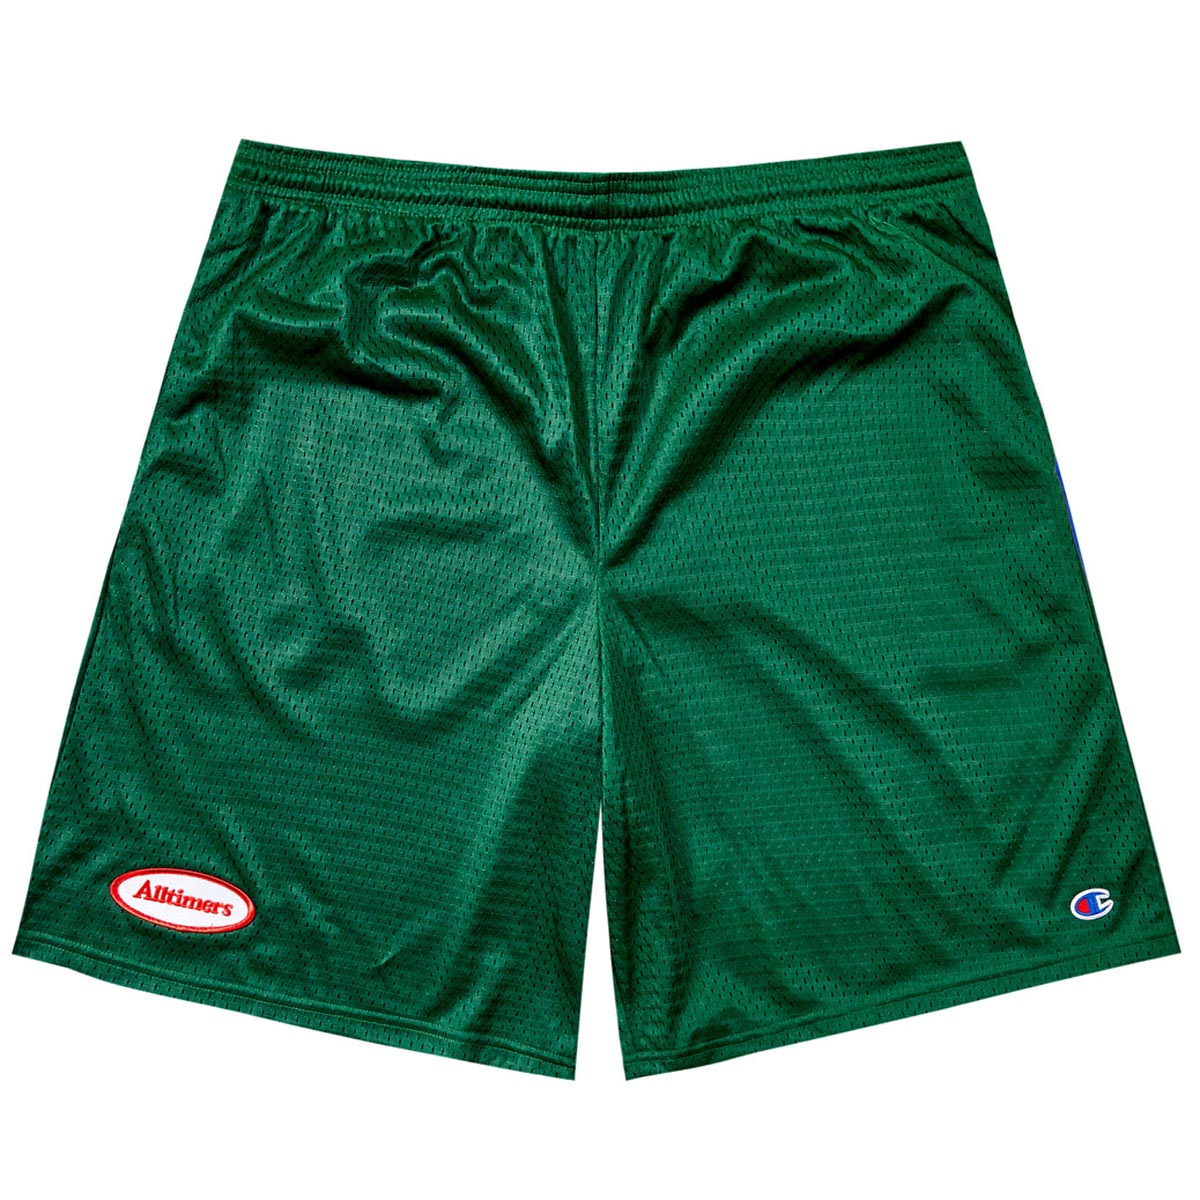 Alltimers Tankful Patch Champion Shorts - Forest Green image 1